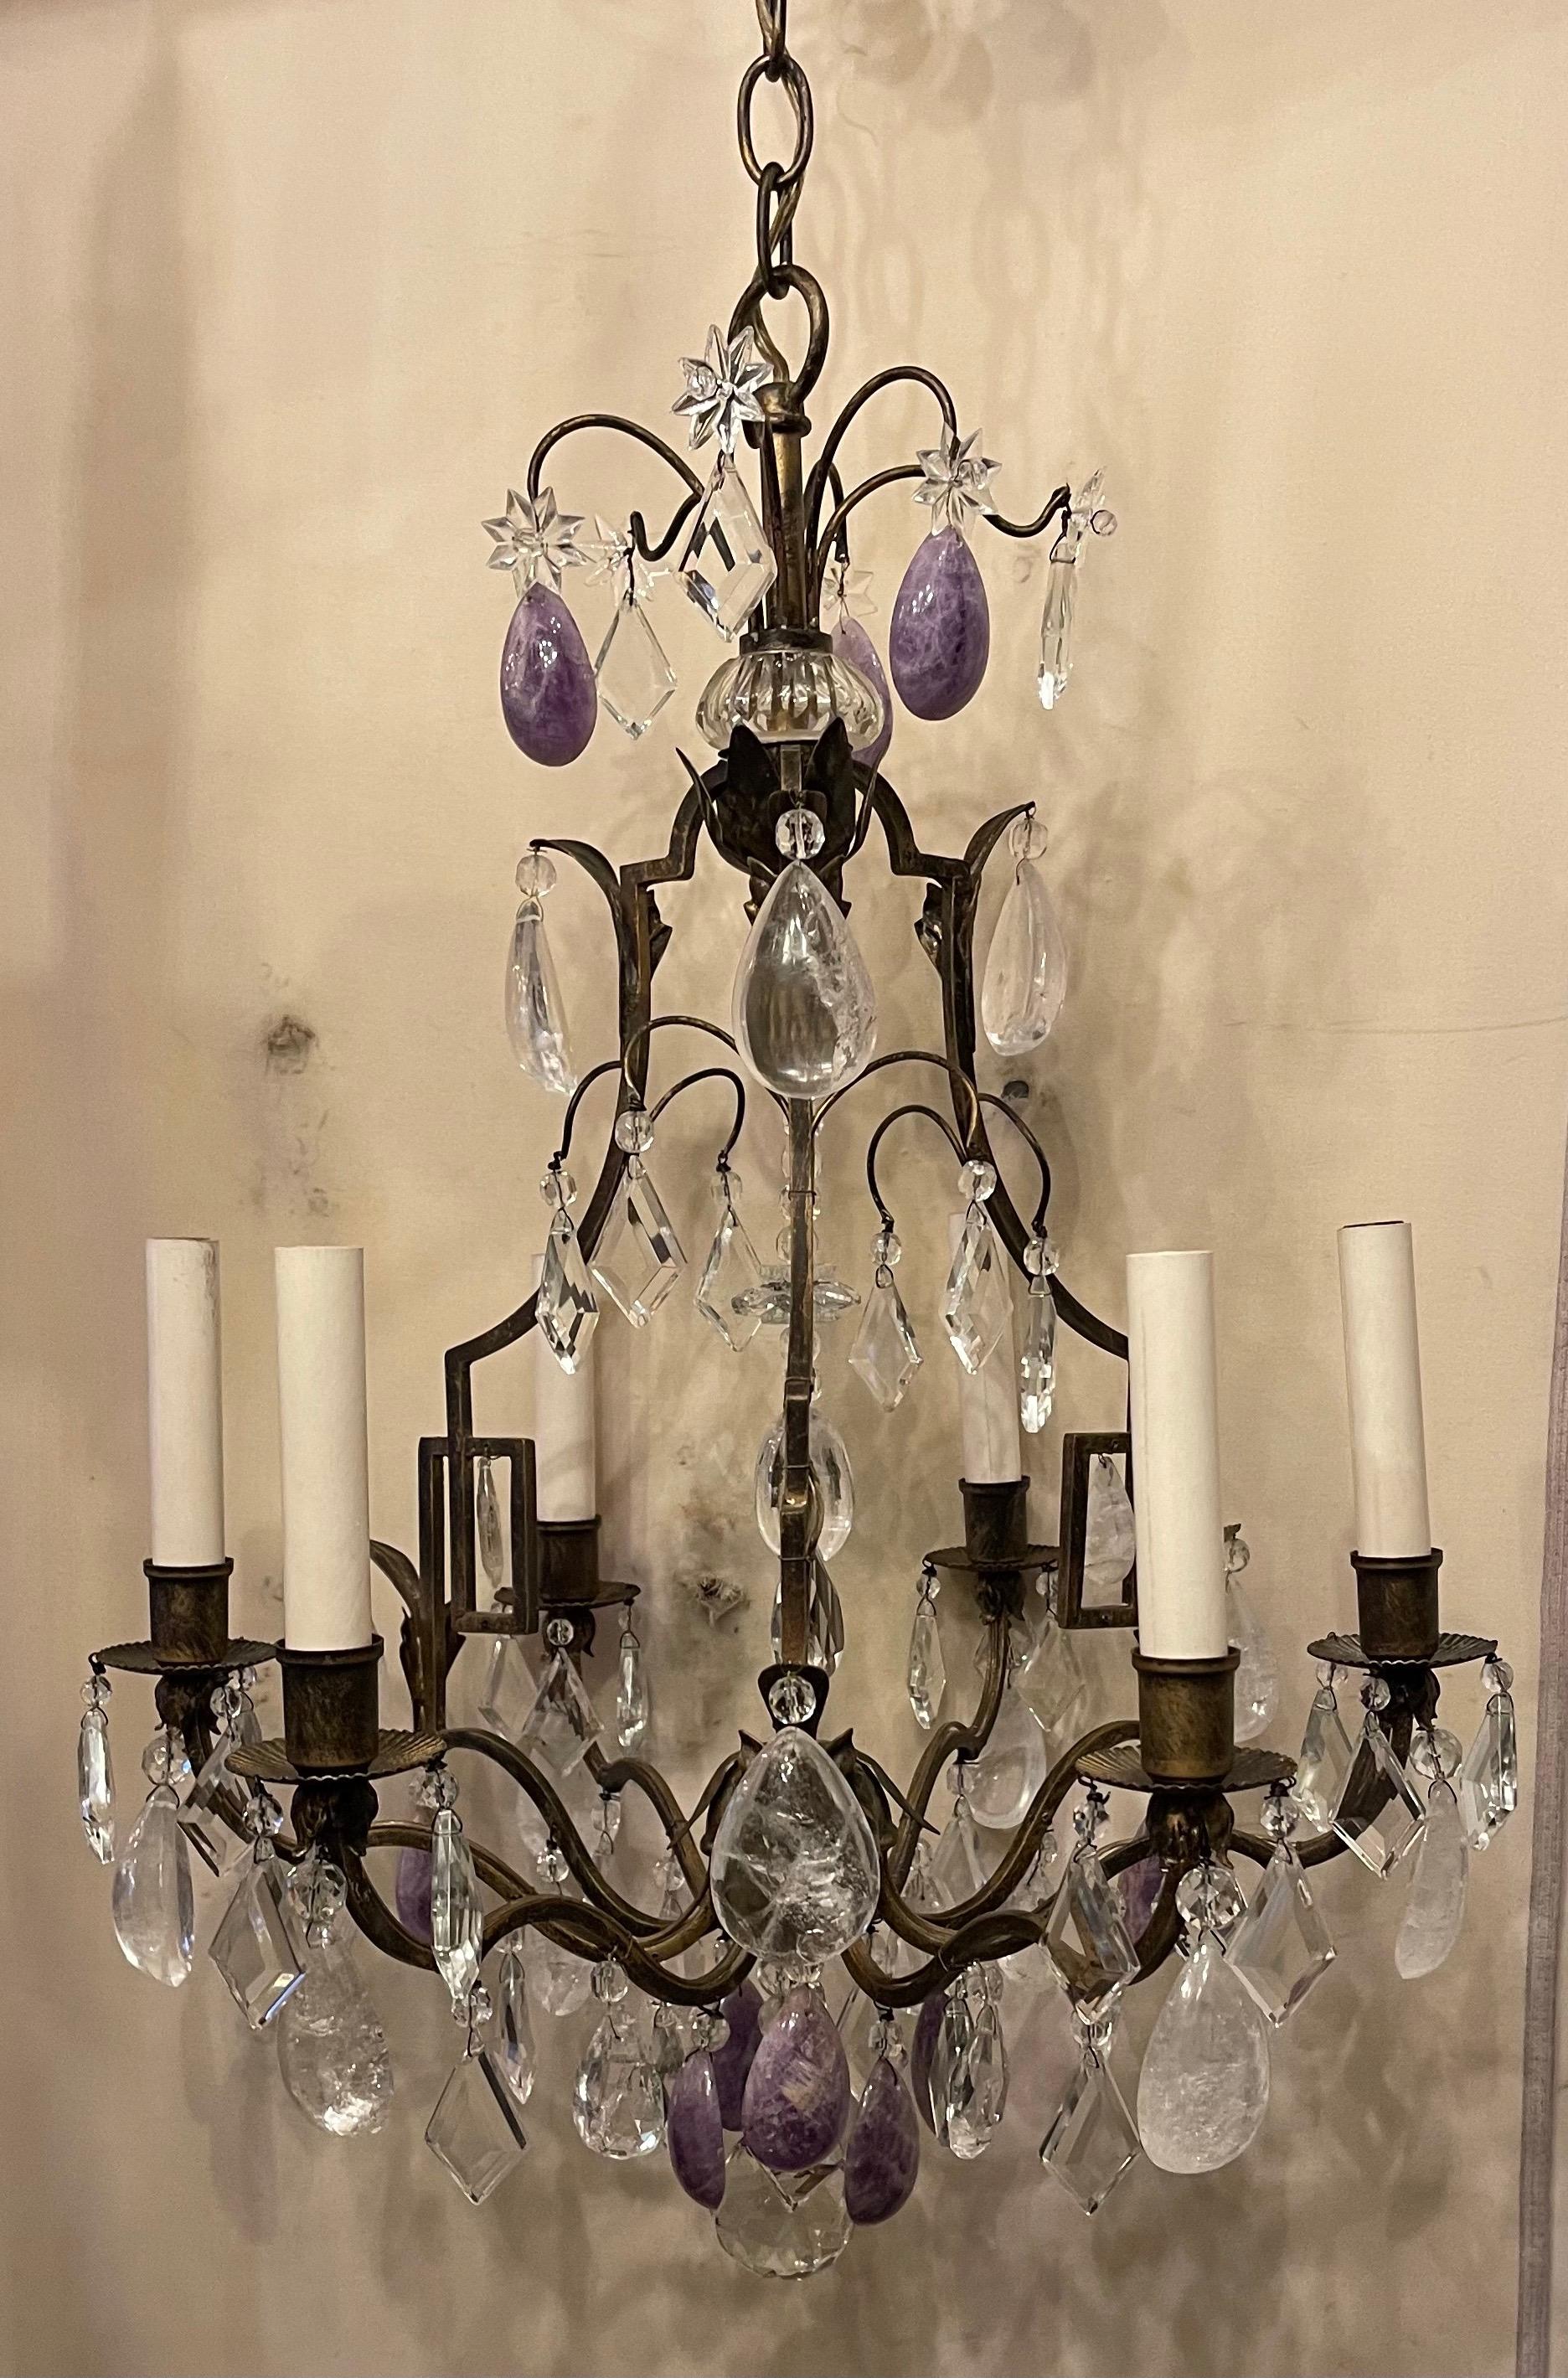 A Wonderful French Maison Bagues Style amethyst and clear rock crystal 6 candelabra light pagoda bird cage form chandelier.